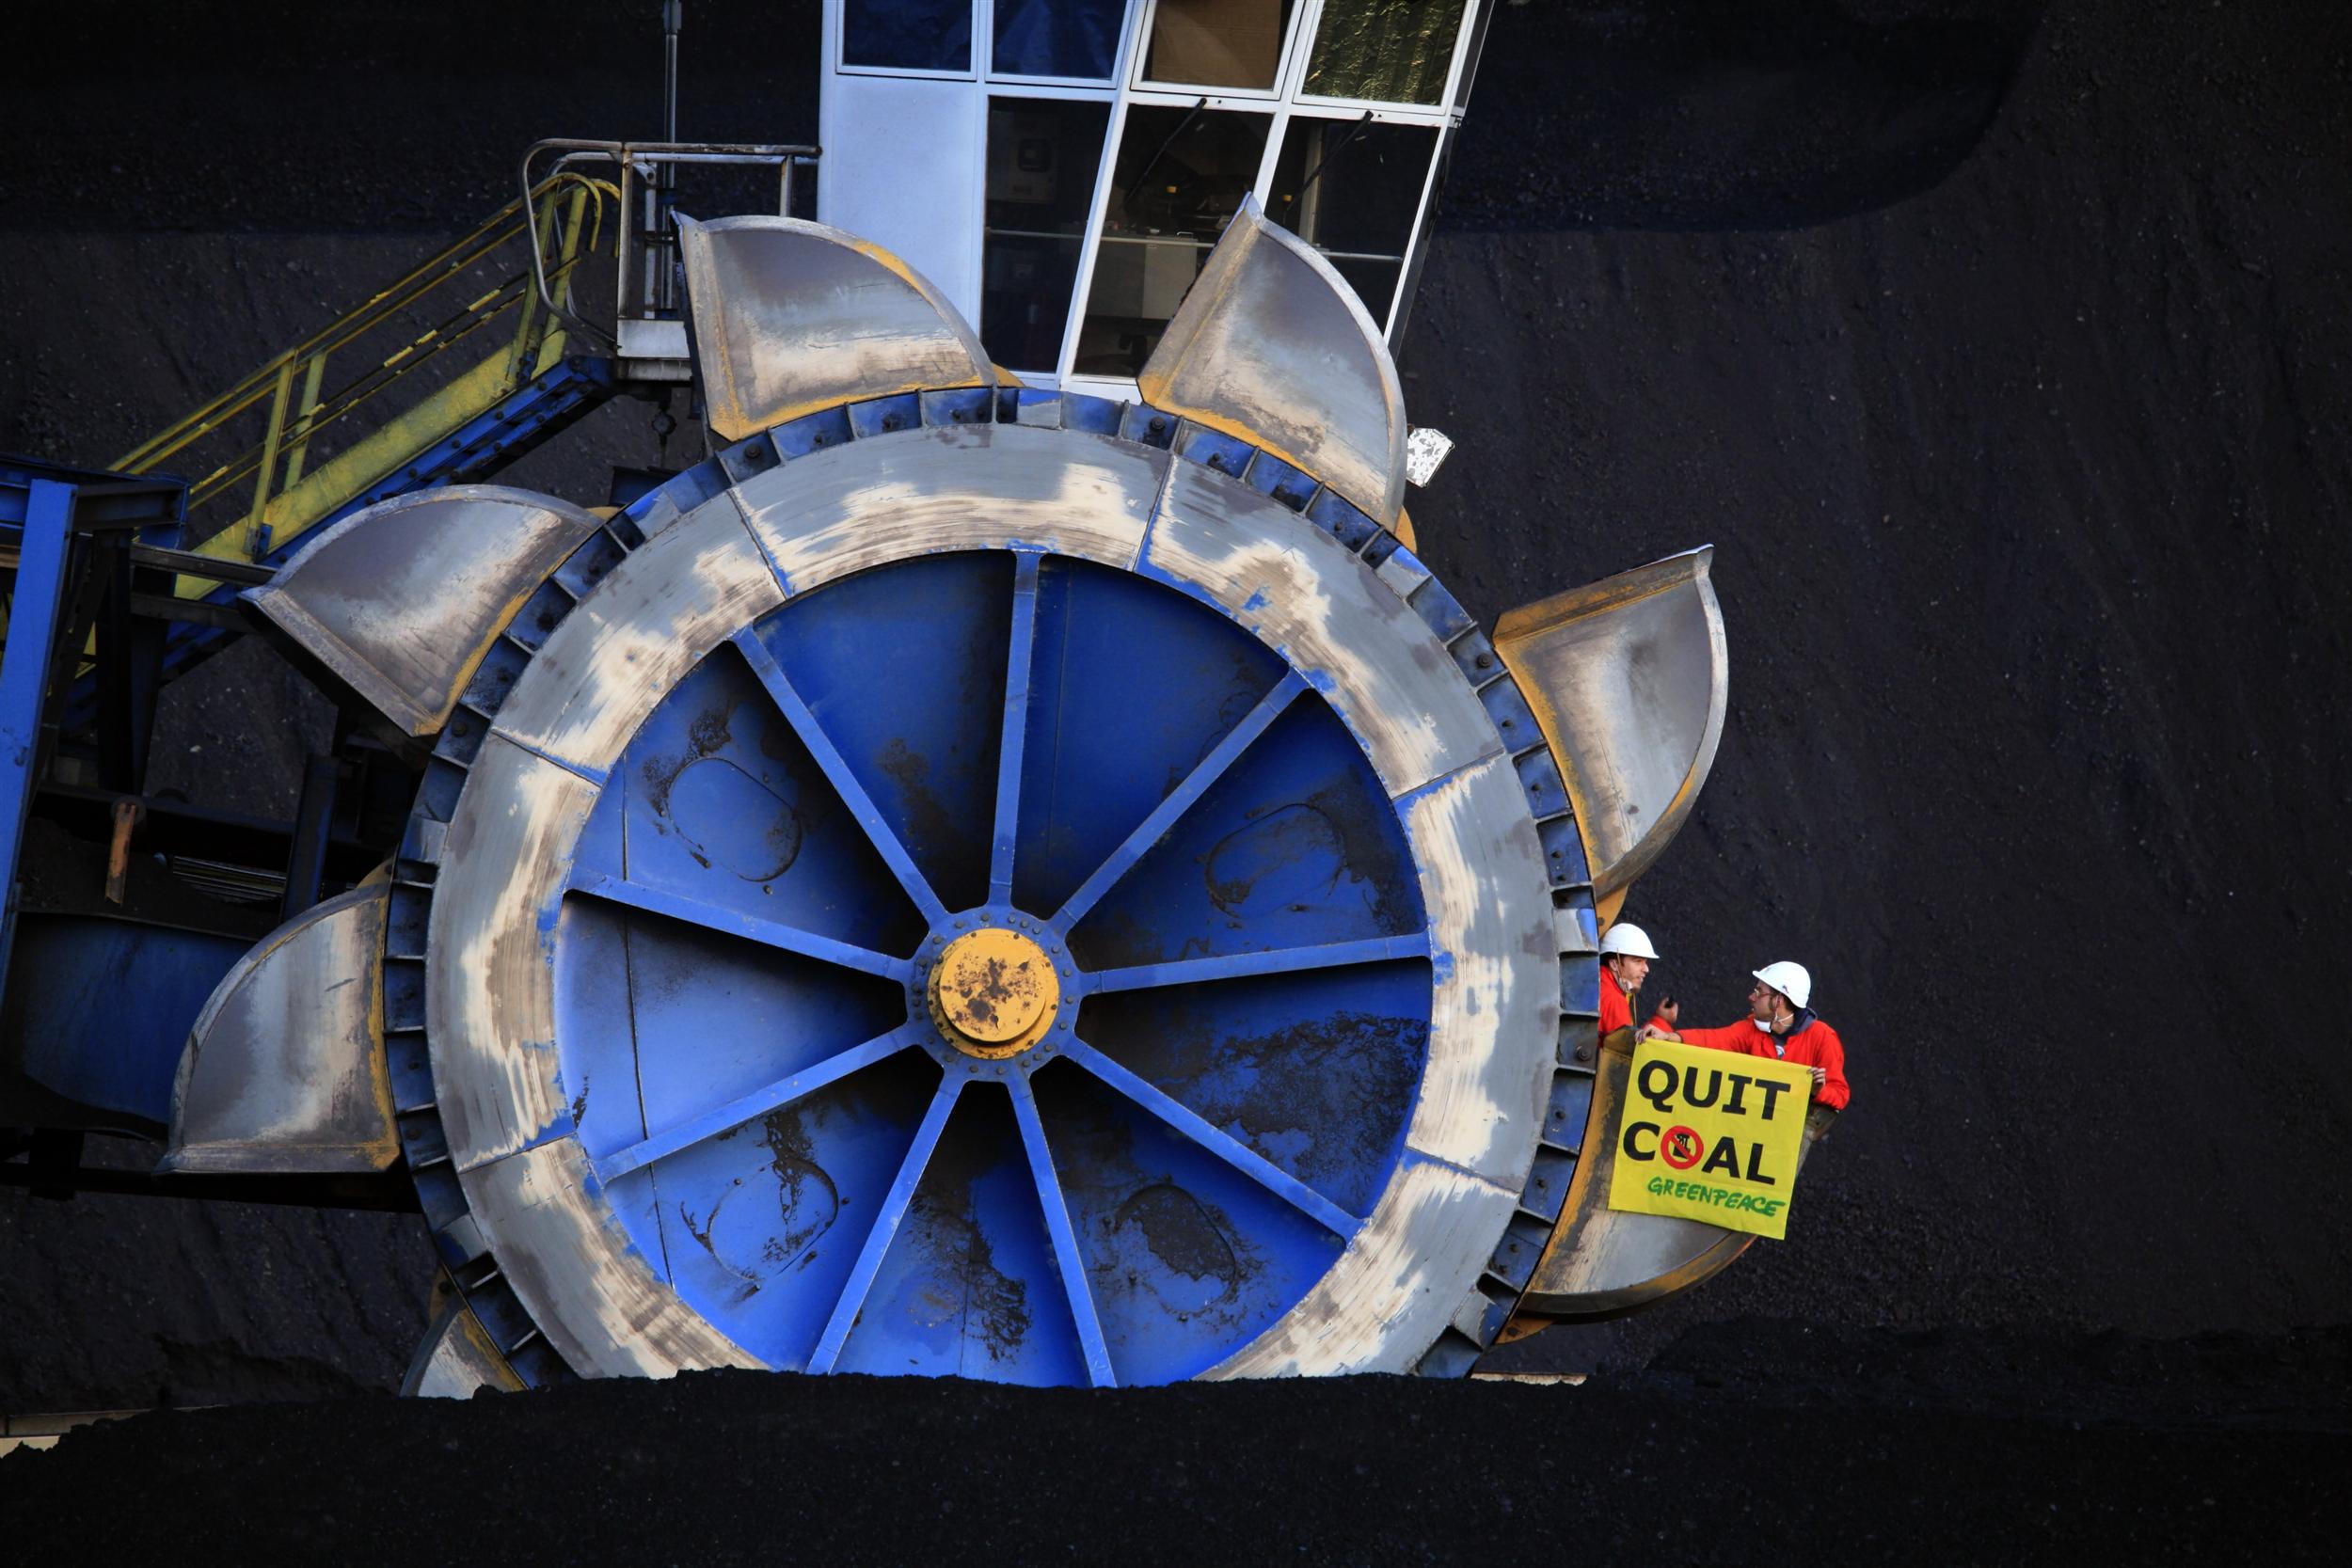 Greenpeace activists block the coal supply to the Fiume Santo power plant of E.ON by locking on to the coal conveyors. They hold a sign reading 'Quit Coal'. The action is to protest against the Sardinian authorities and energy company E.ONs expansion of coal power on the island and rejection of climate saving alternatives.